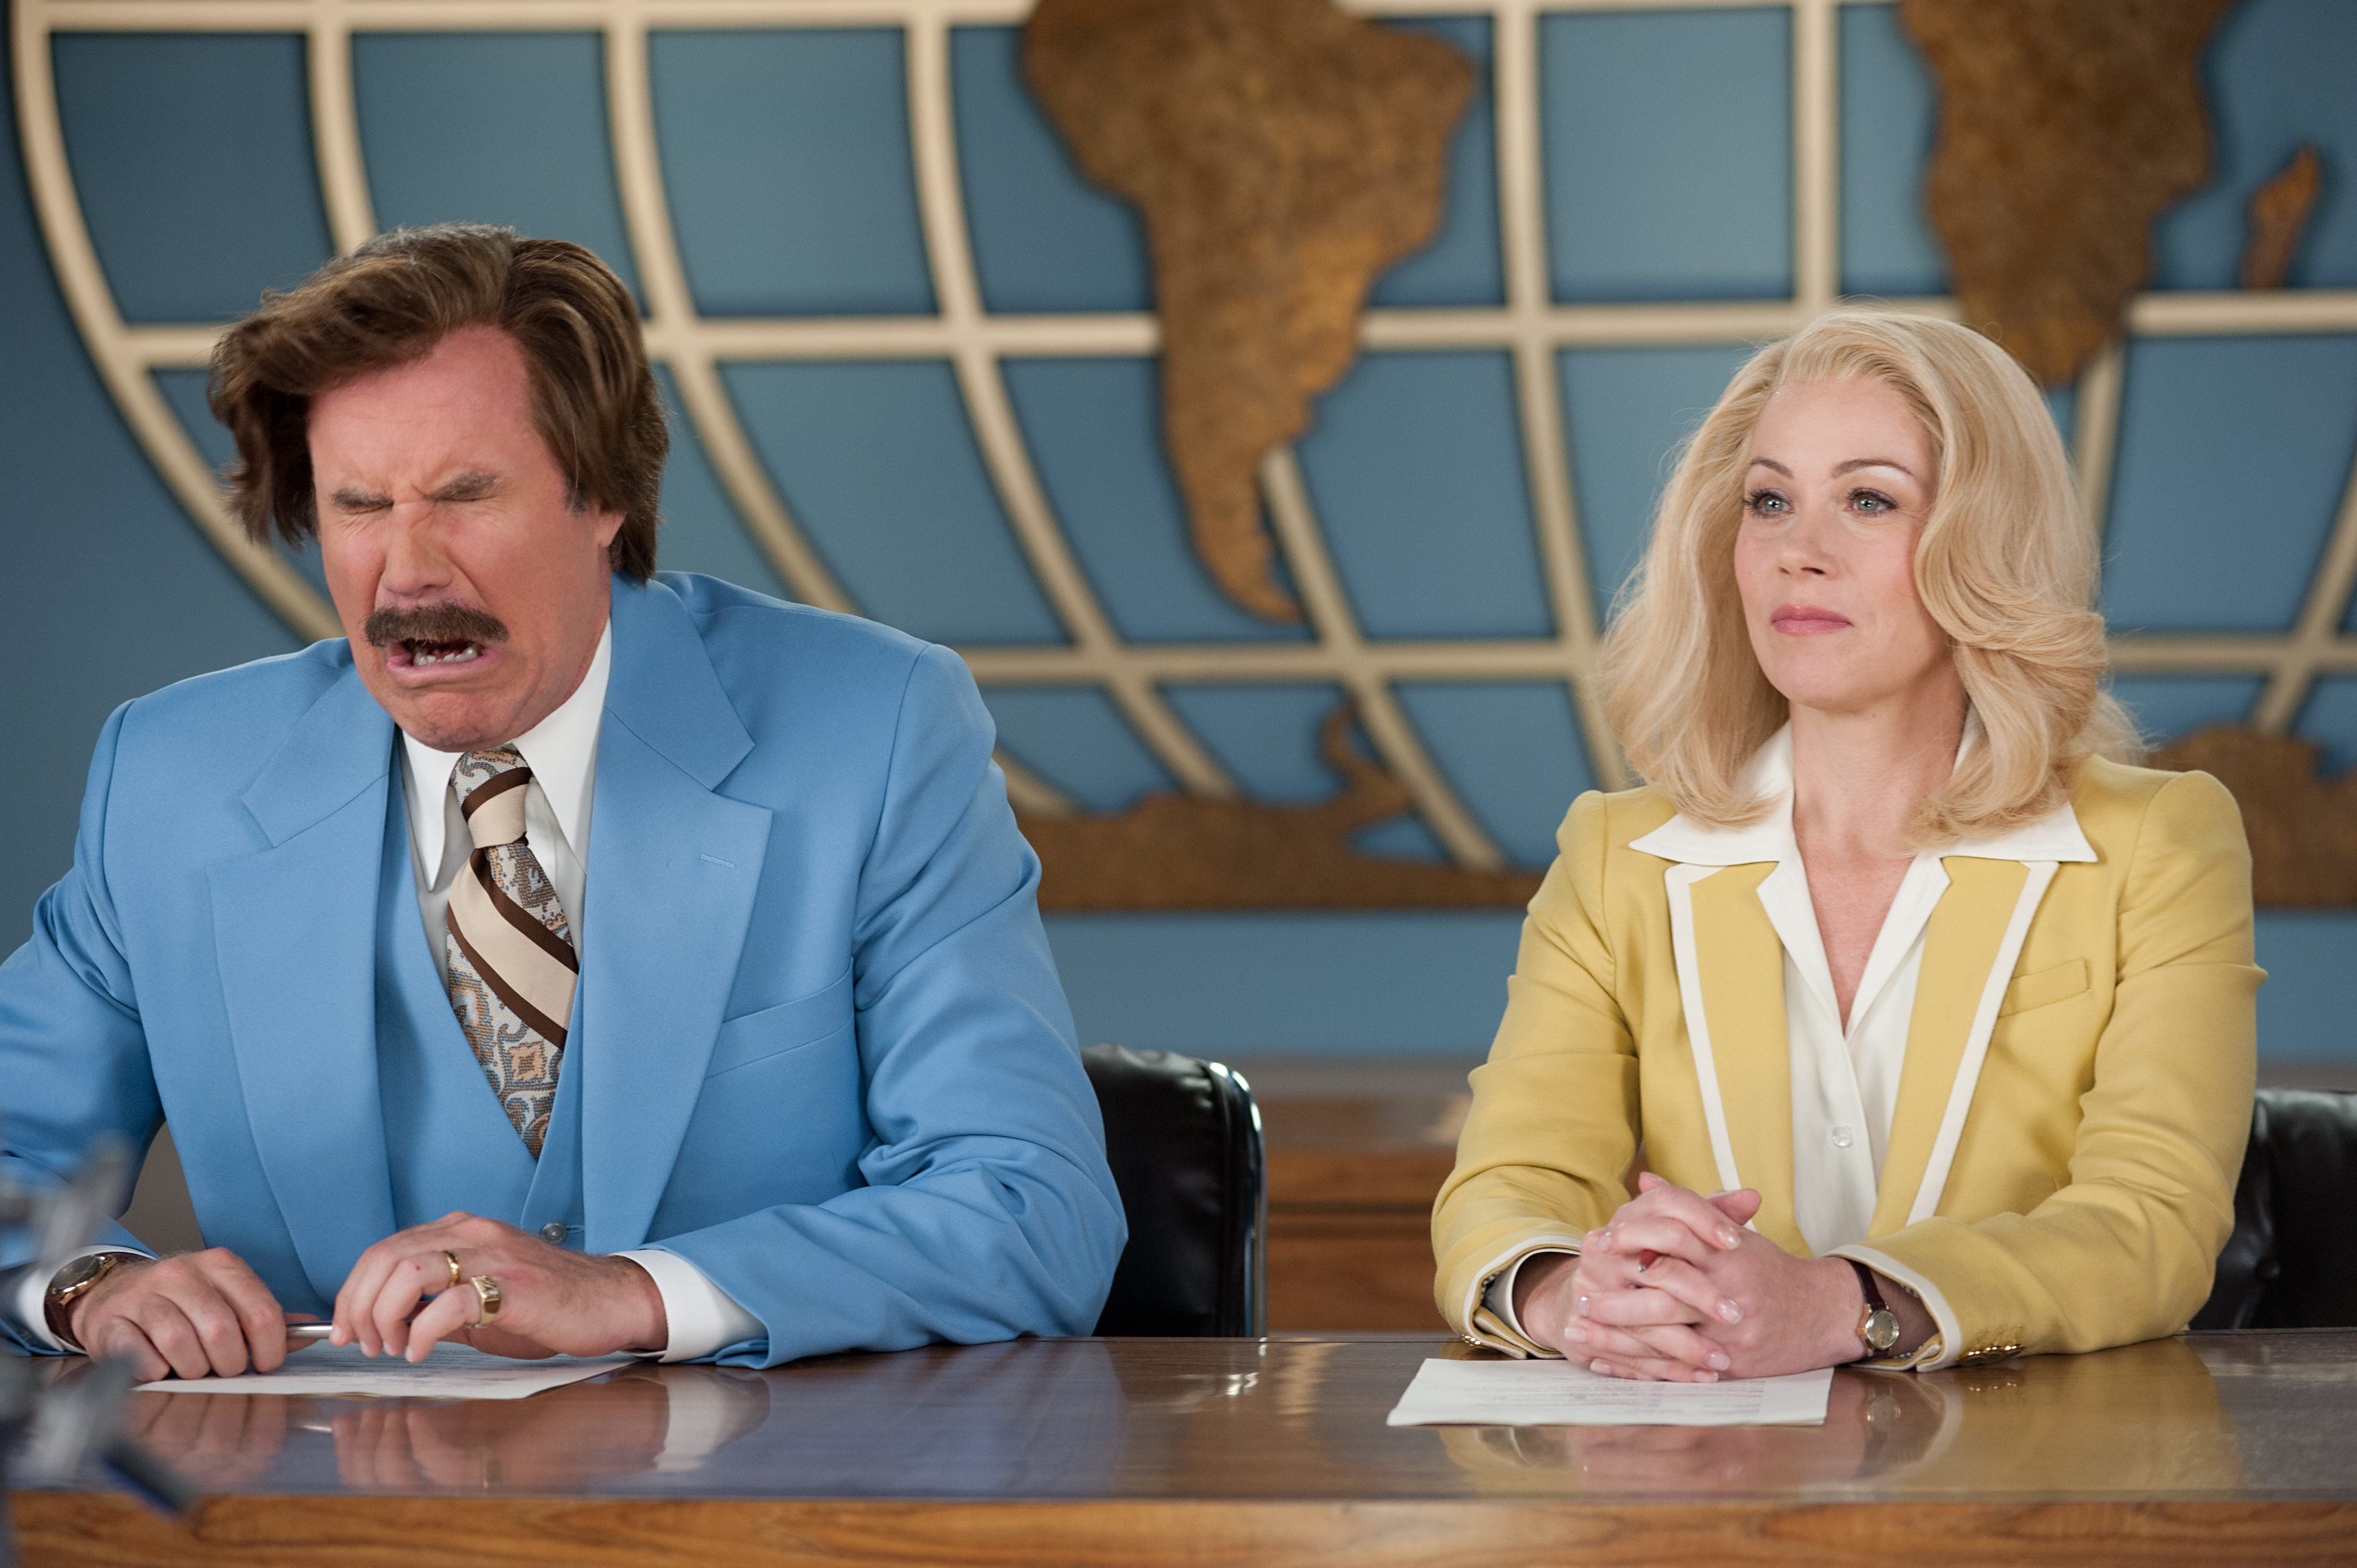 Again Veronica (Christina Applegate) gets the better of Ron (Ferrell).